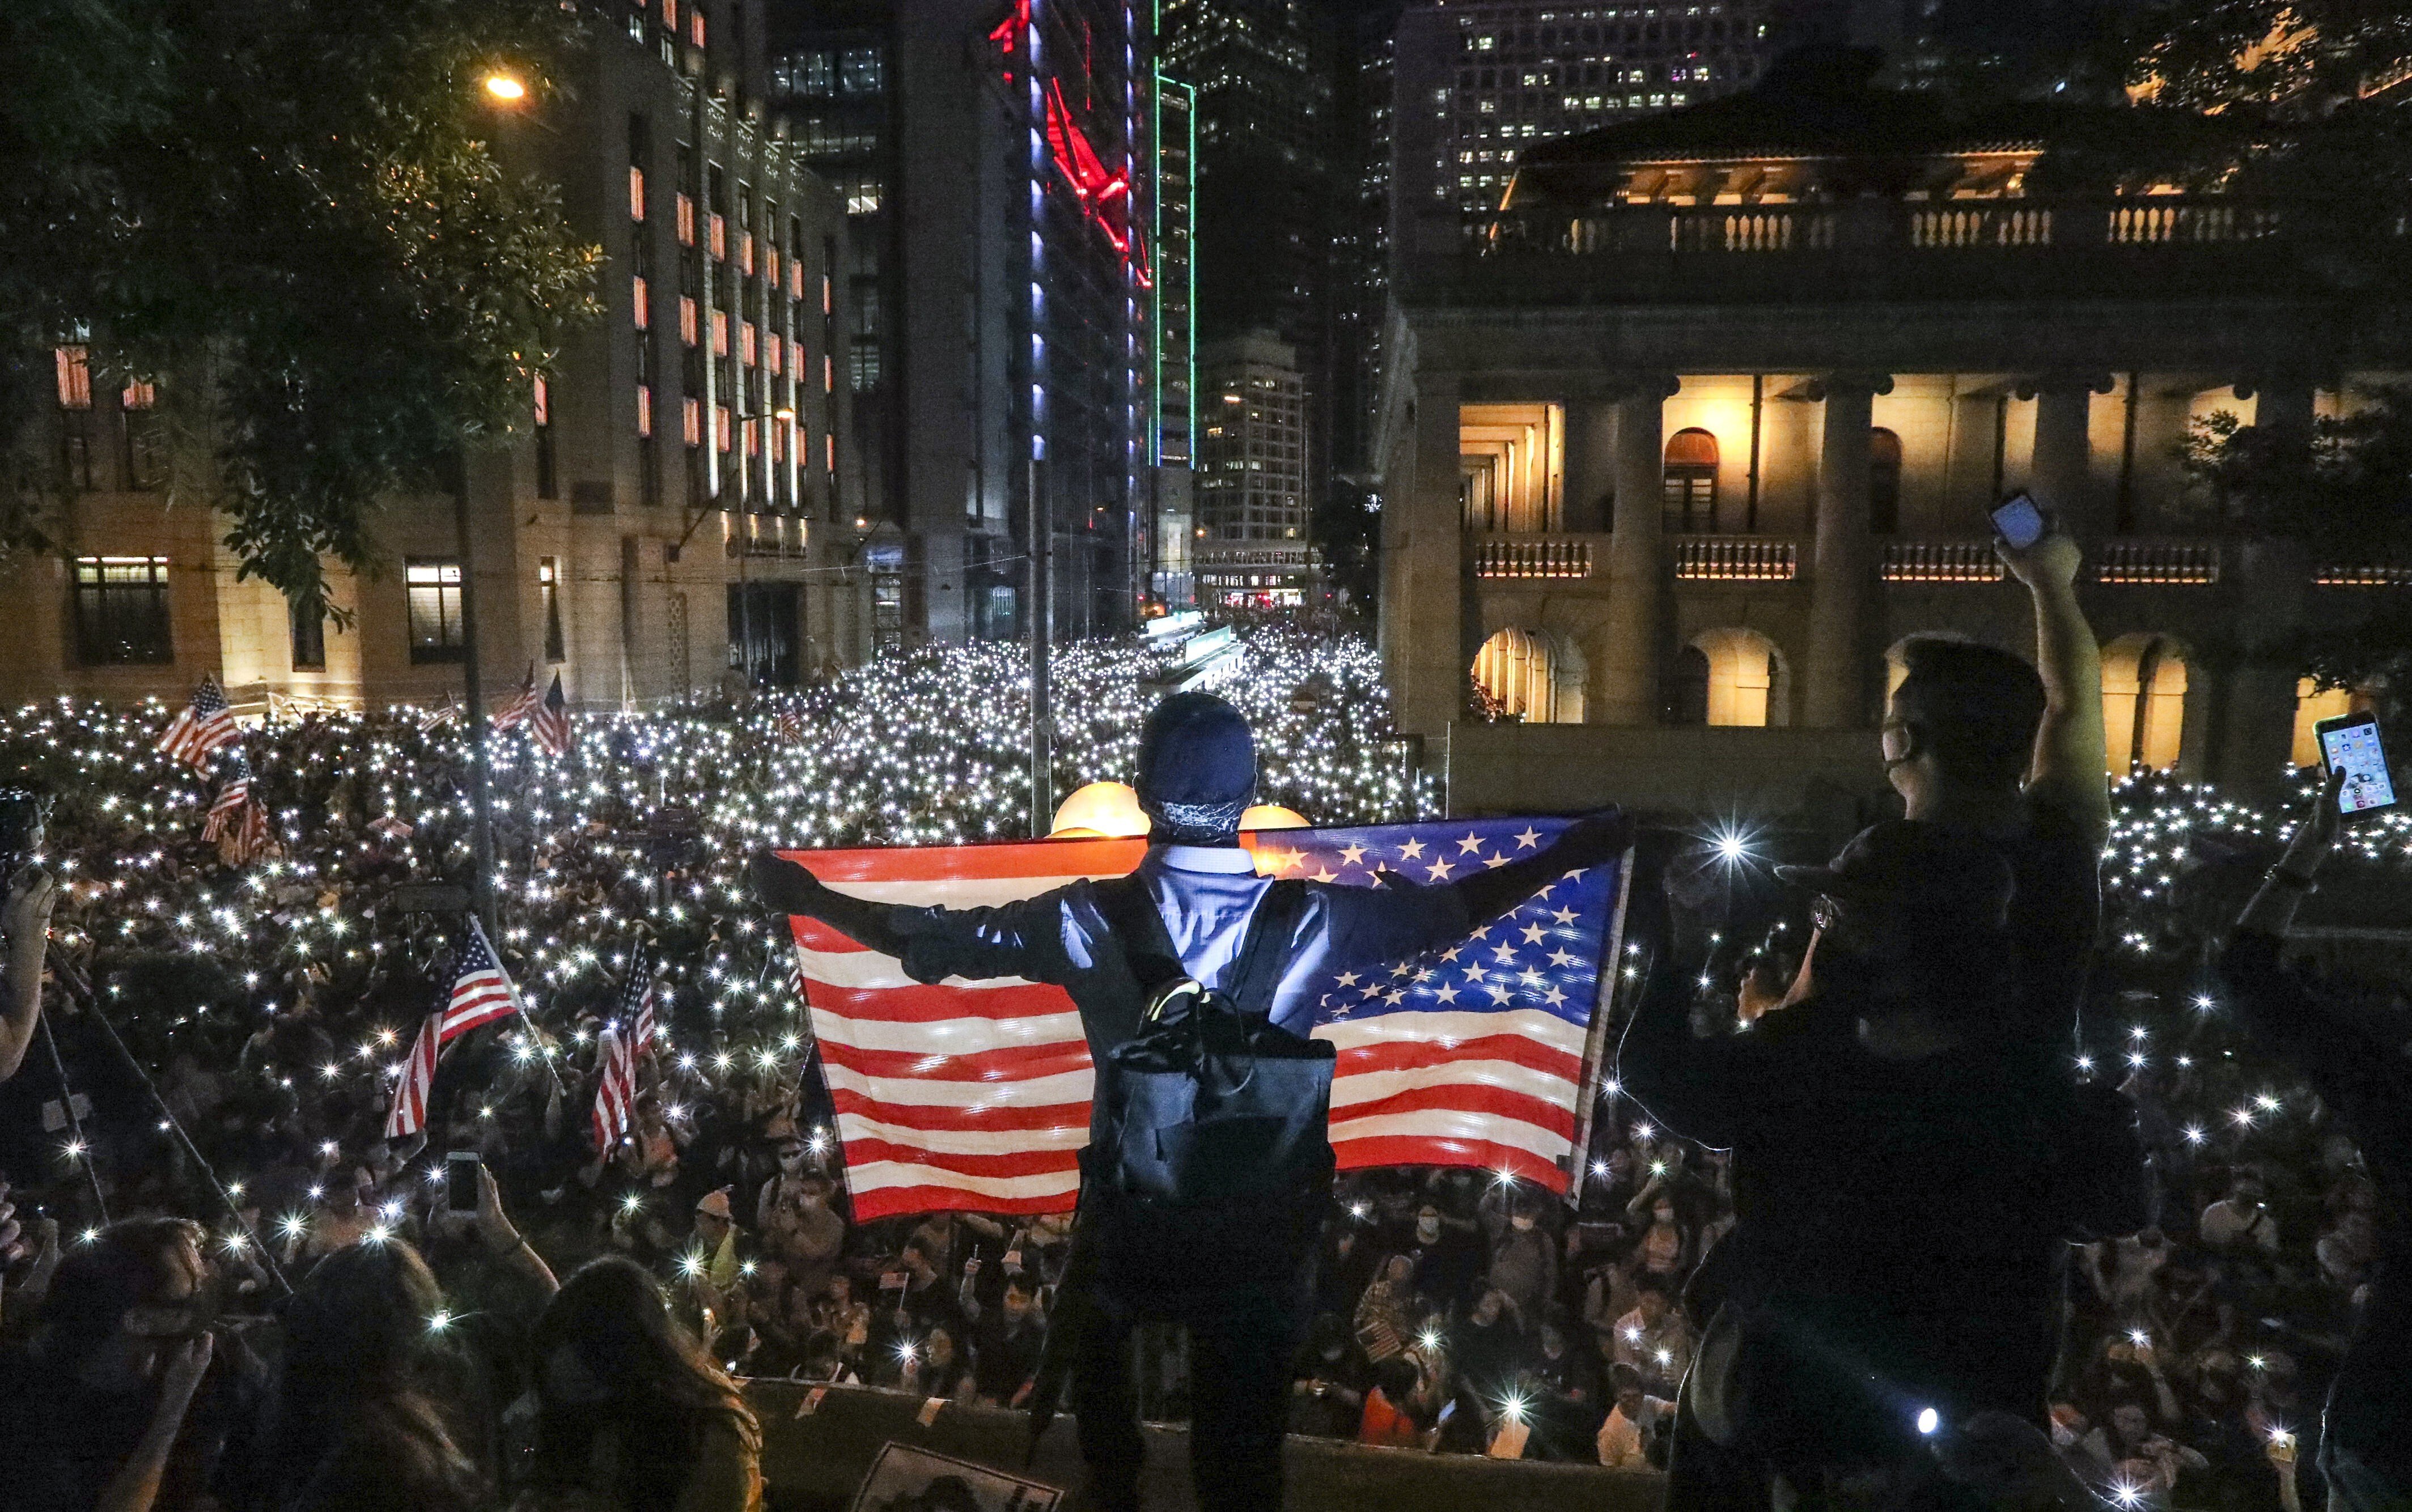 Anti-government protesters wave a US flag during an October 2019 protest in Central. Photo: Felix Wong